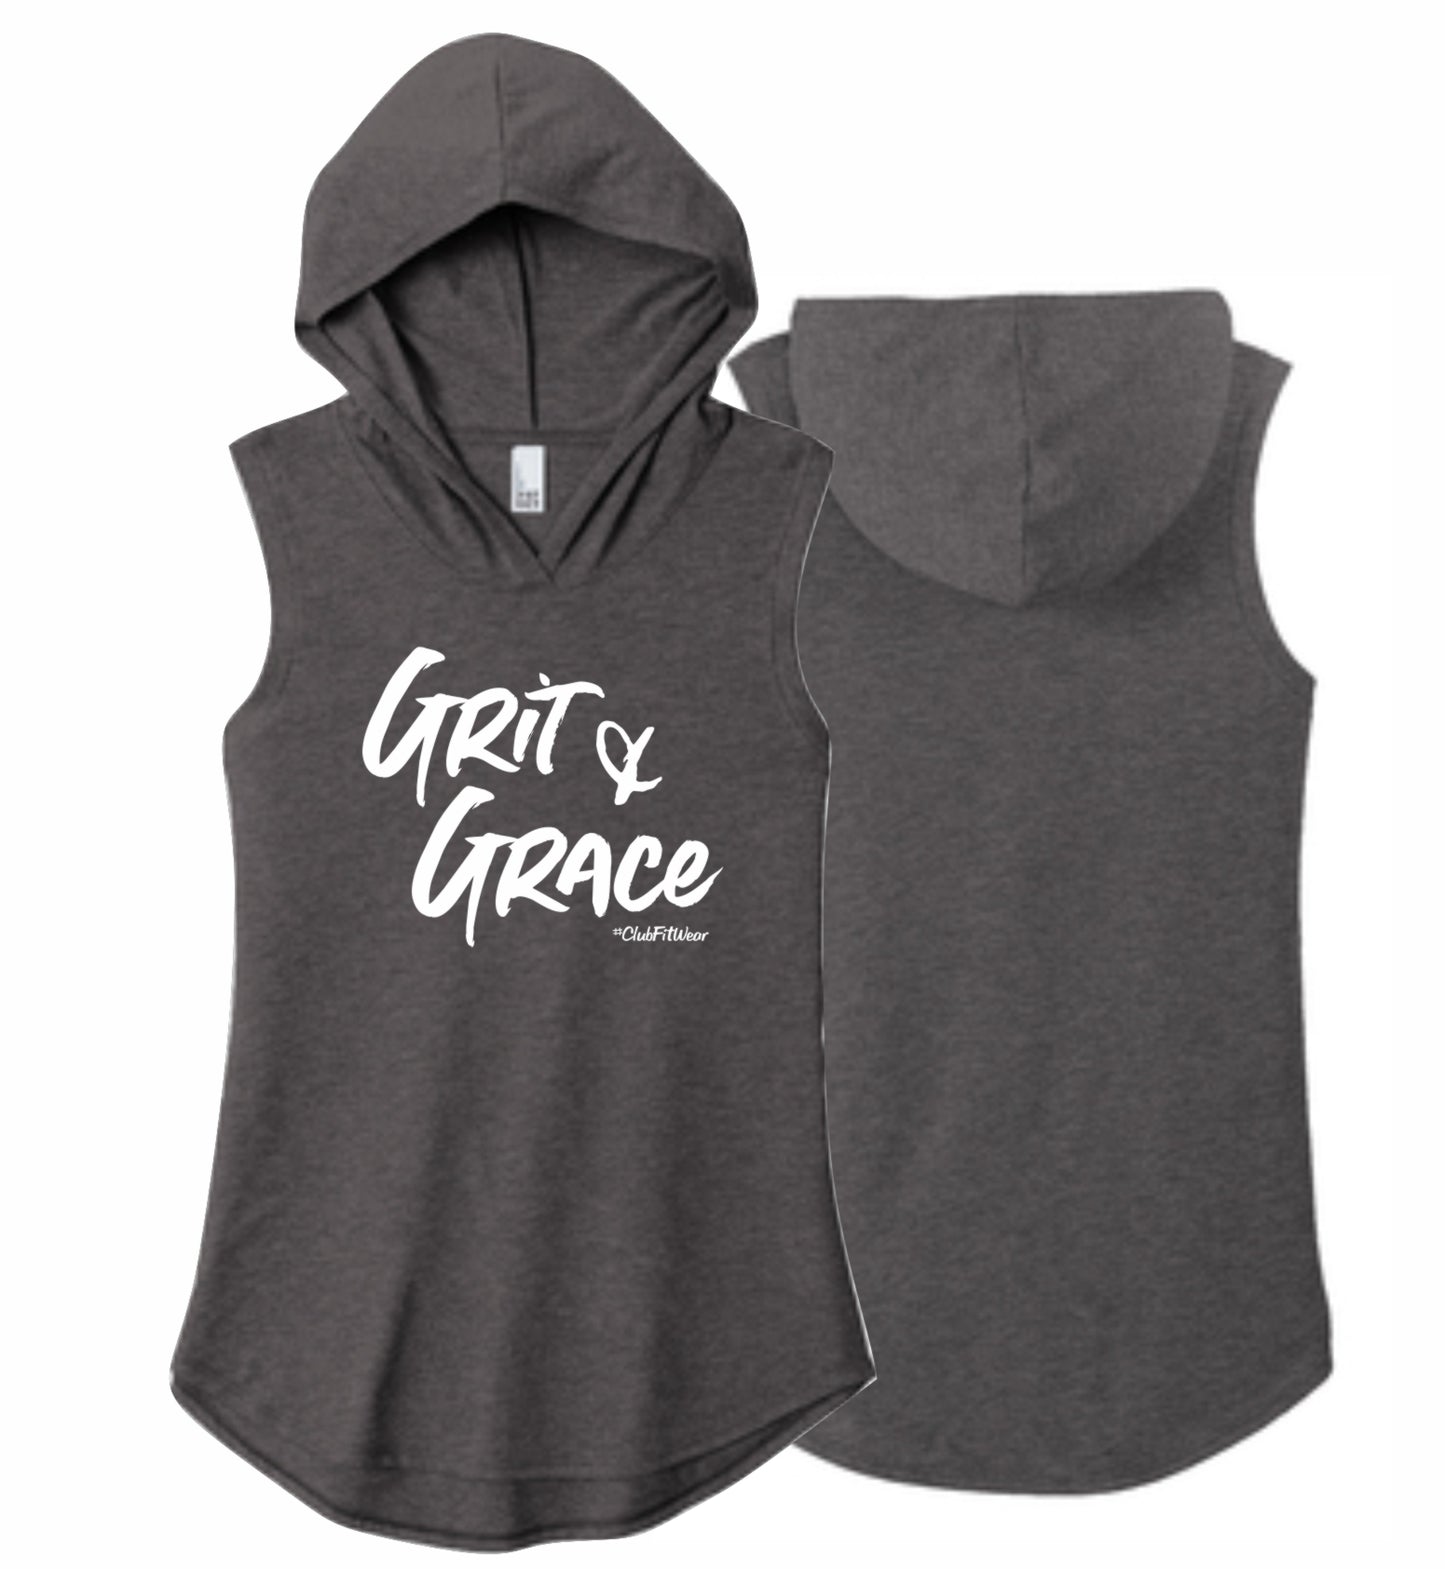 Grit and Grace - Sleeveless Hoodie